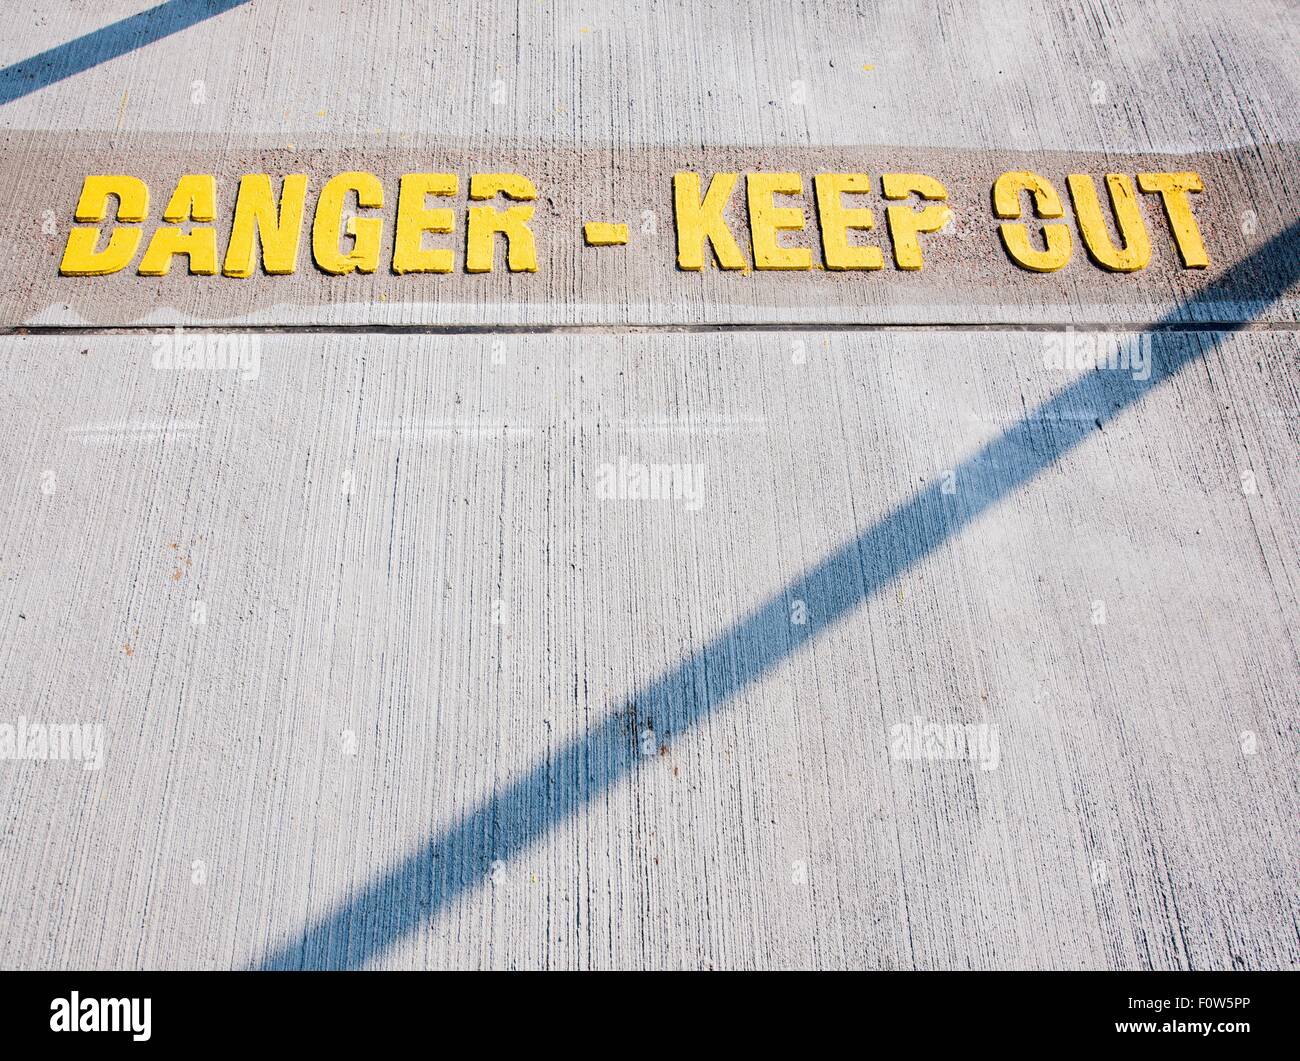 Danger - keep out warning sign on concrete floor Stock Photo